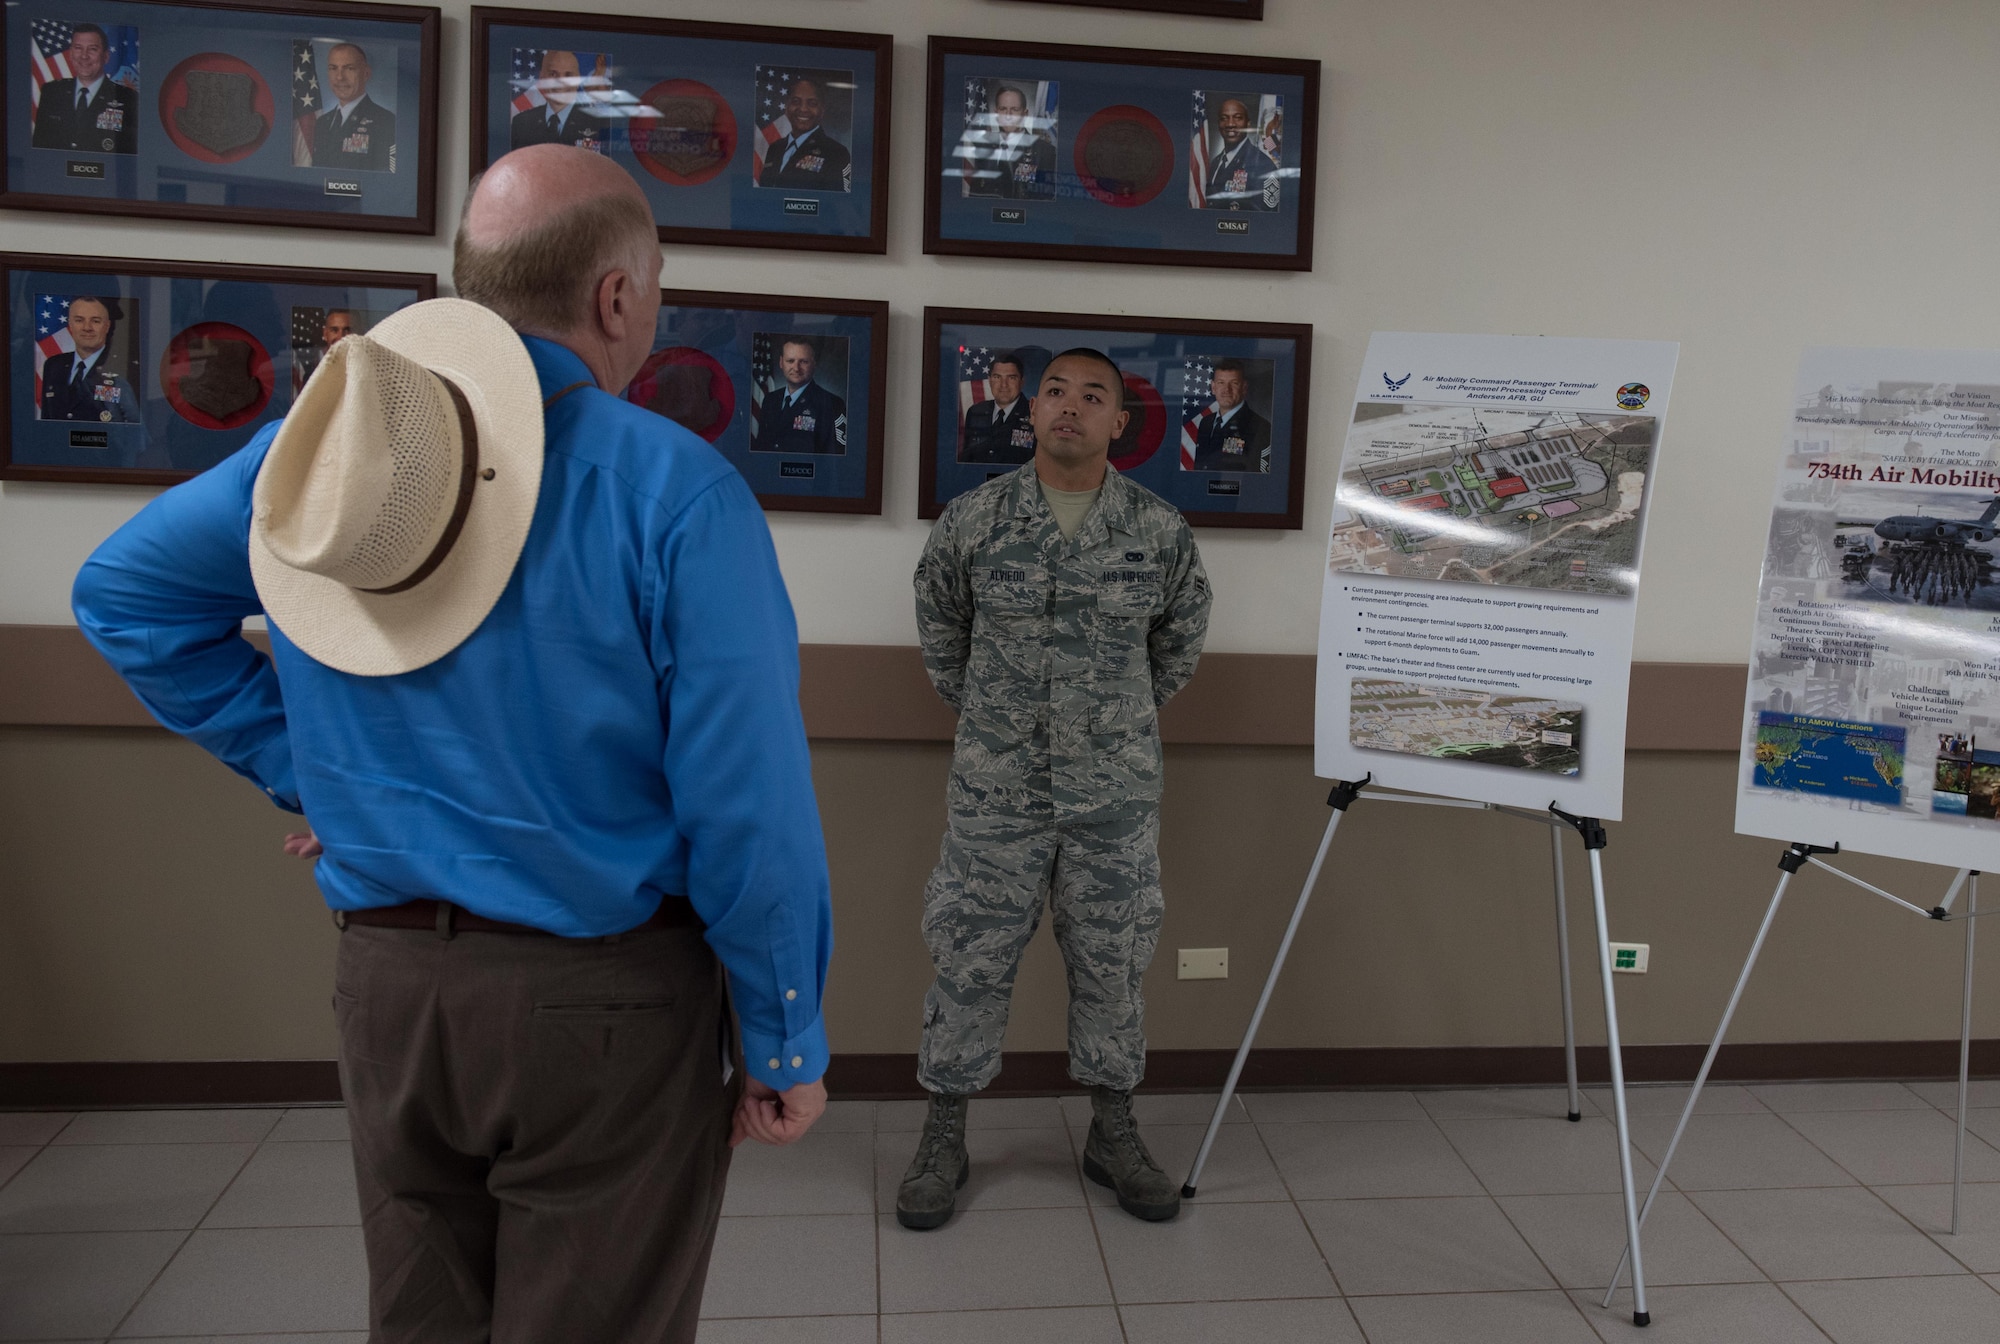 Airman 1st Class Joseph Alviedo, 734th Air Mobility Squadron, right, briefs Jay Hone, the husband of Secretary of the Air Force Heather Wilson, during a refueling visit Jan. 25, 2018, at Andersen Air Force Base, Guam. During their visit, Wilson and Hone met with Airmen from the 36th Wing and learned more about Andersen’s unique mission in the Pacific region. (U.S. Air Force photo by Staff Sgt. Alexander W. Riedel)